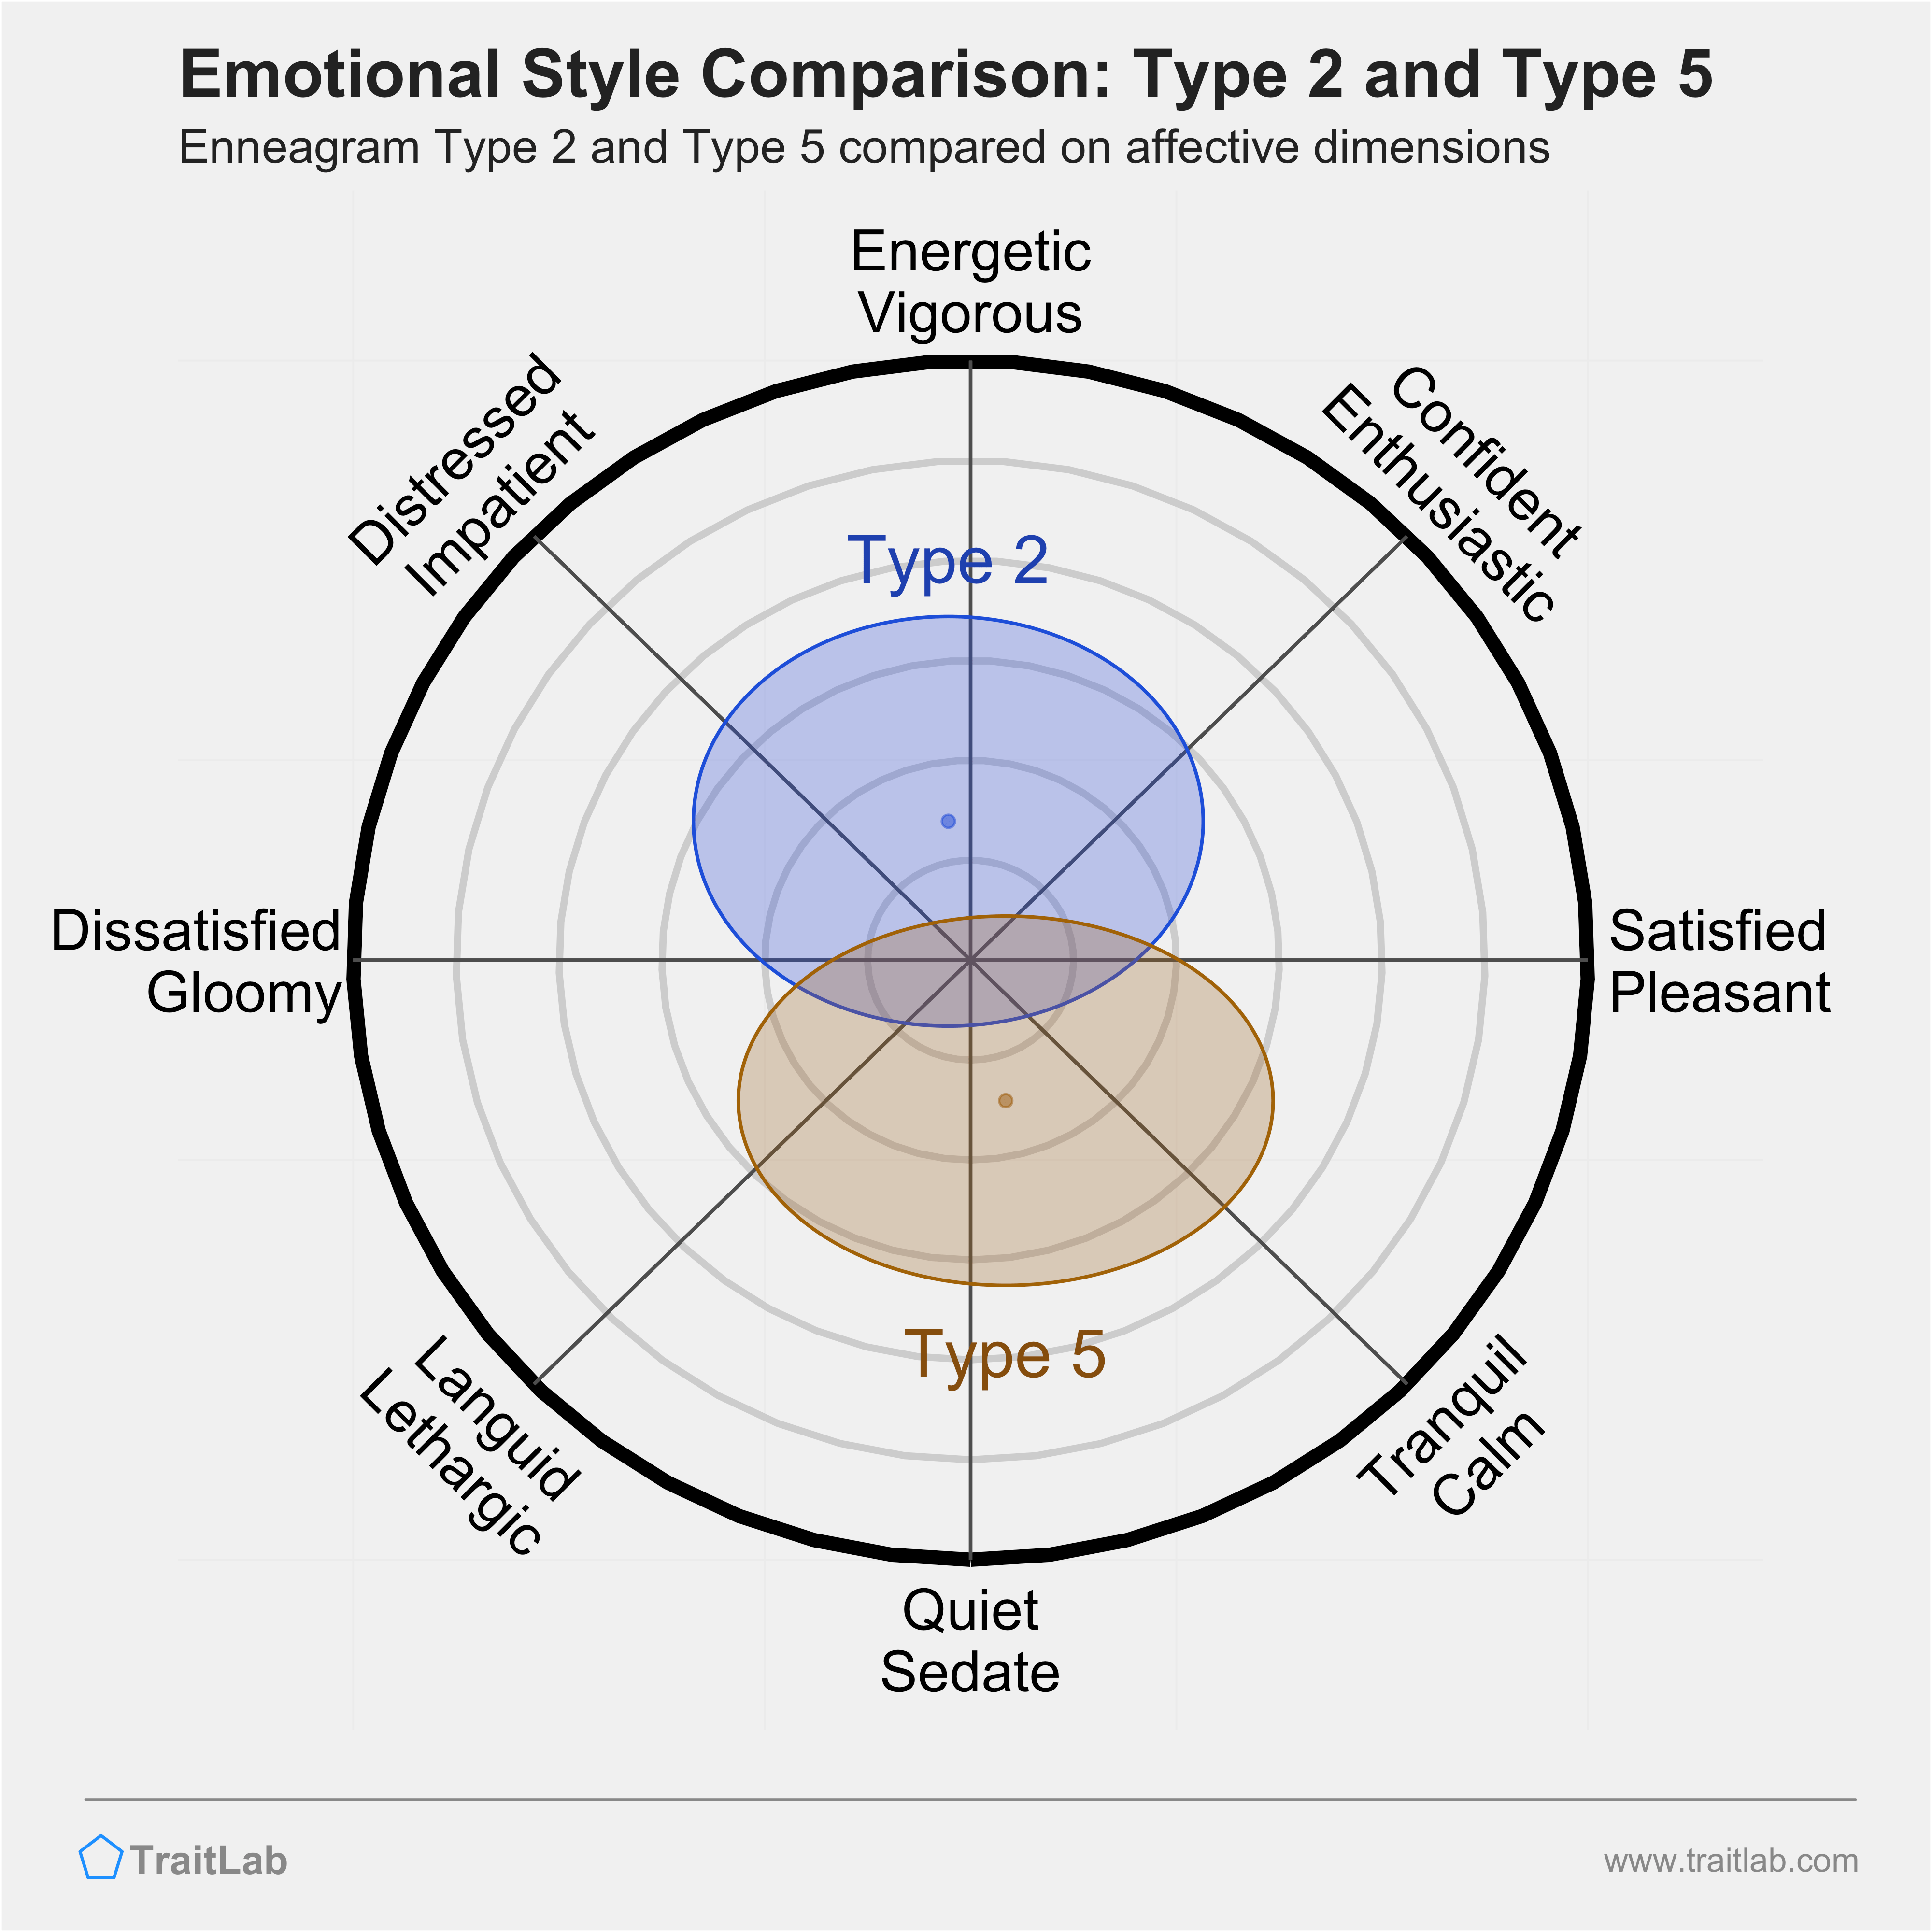 Type 2 and Type 5 comparison across emotional (affective) dimensions